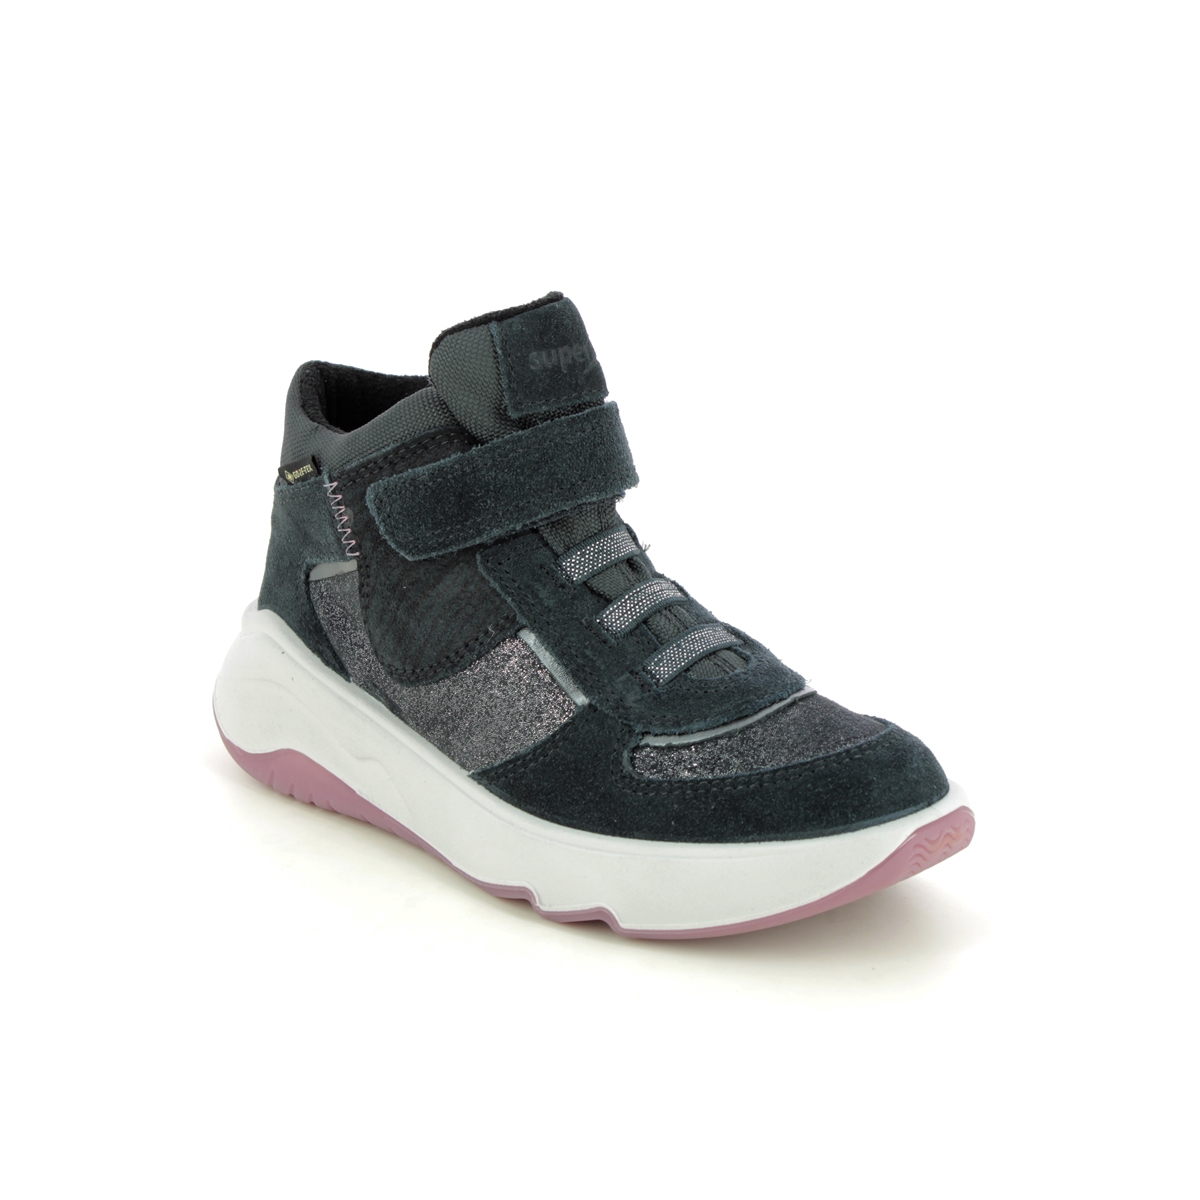 Superfit Melodie Ht Gtx Black Suede Kids Girls Trainers 1000632-2000 In Size 32 In Plain Black Suede For kids